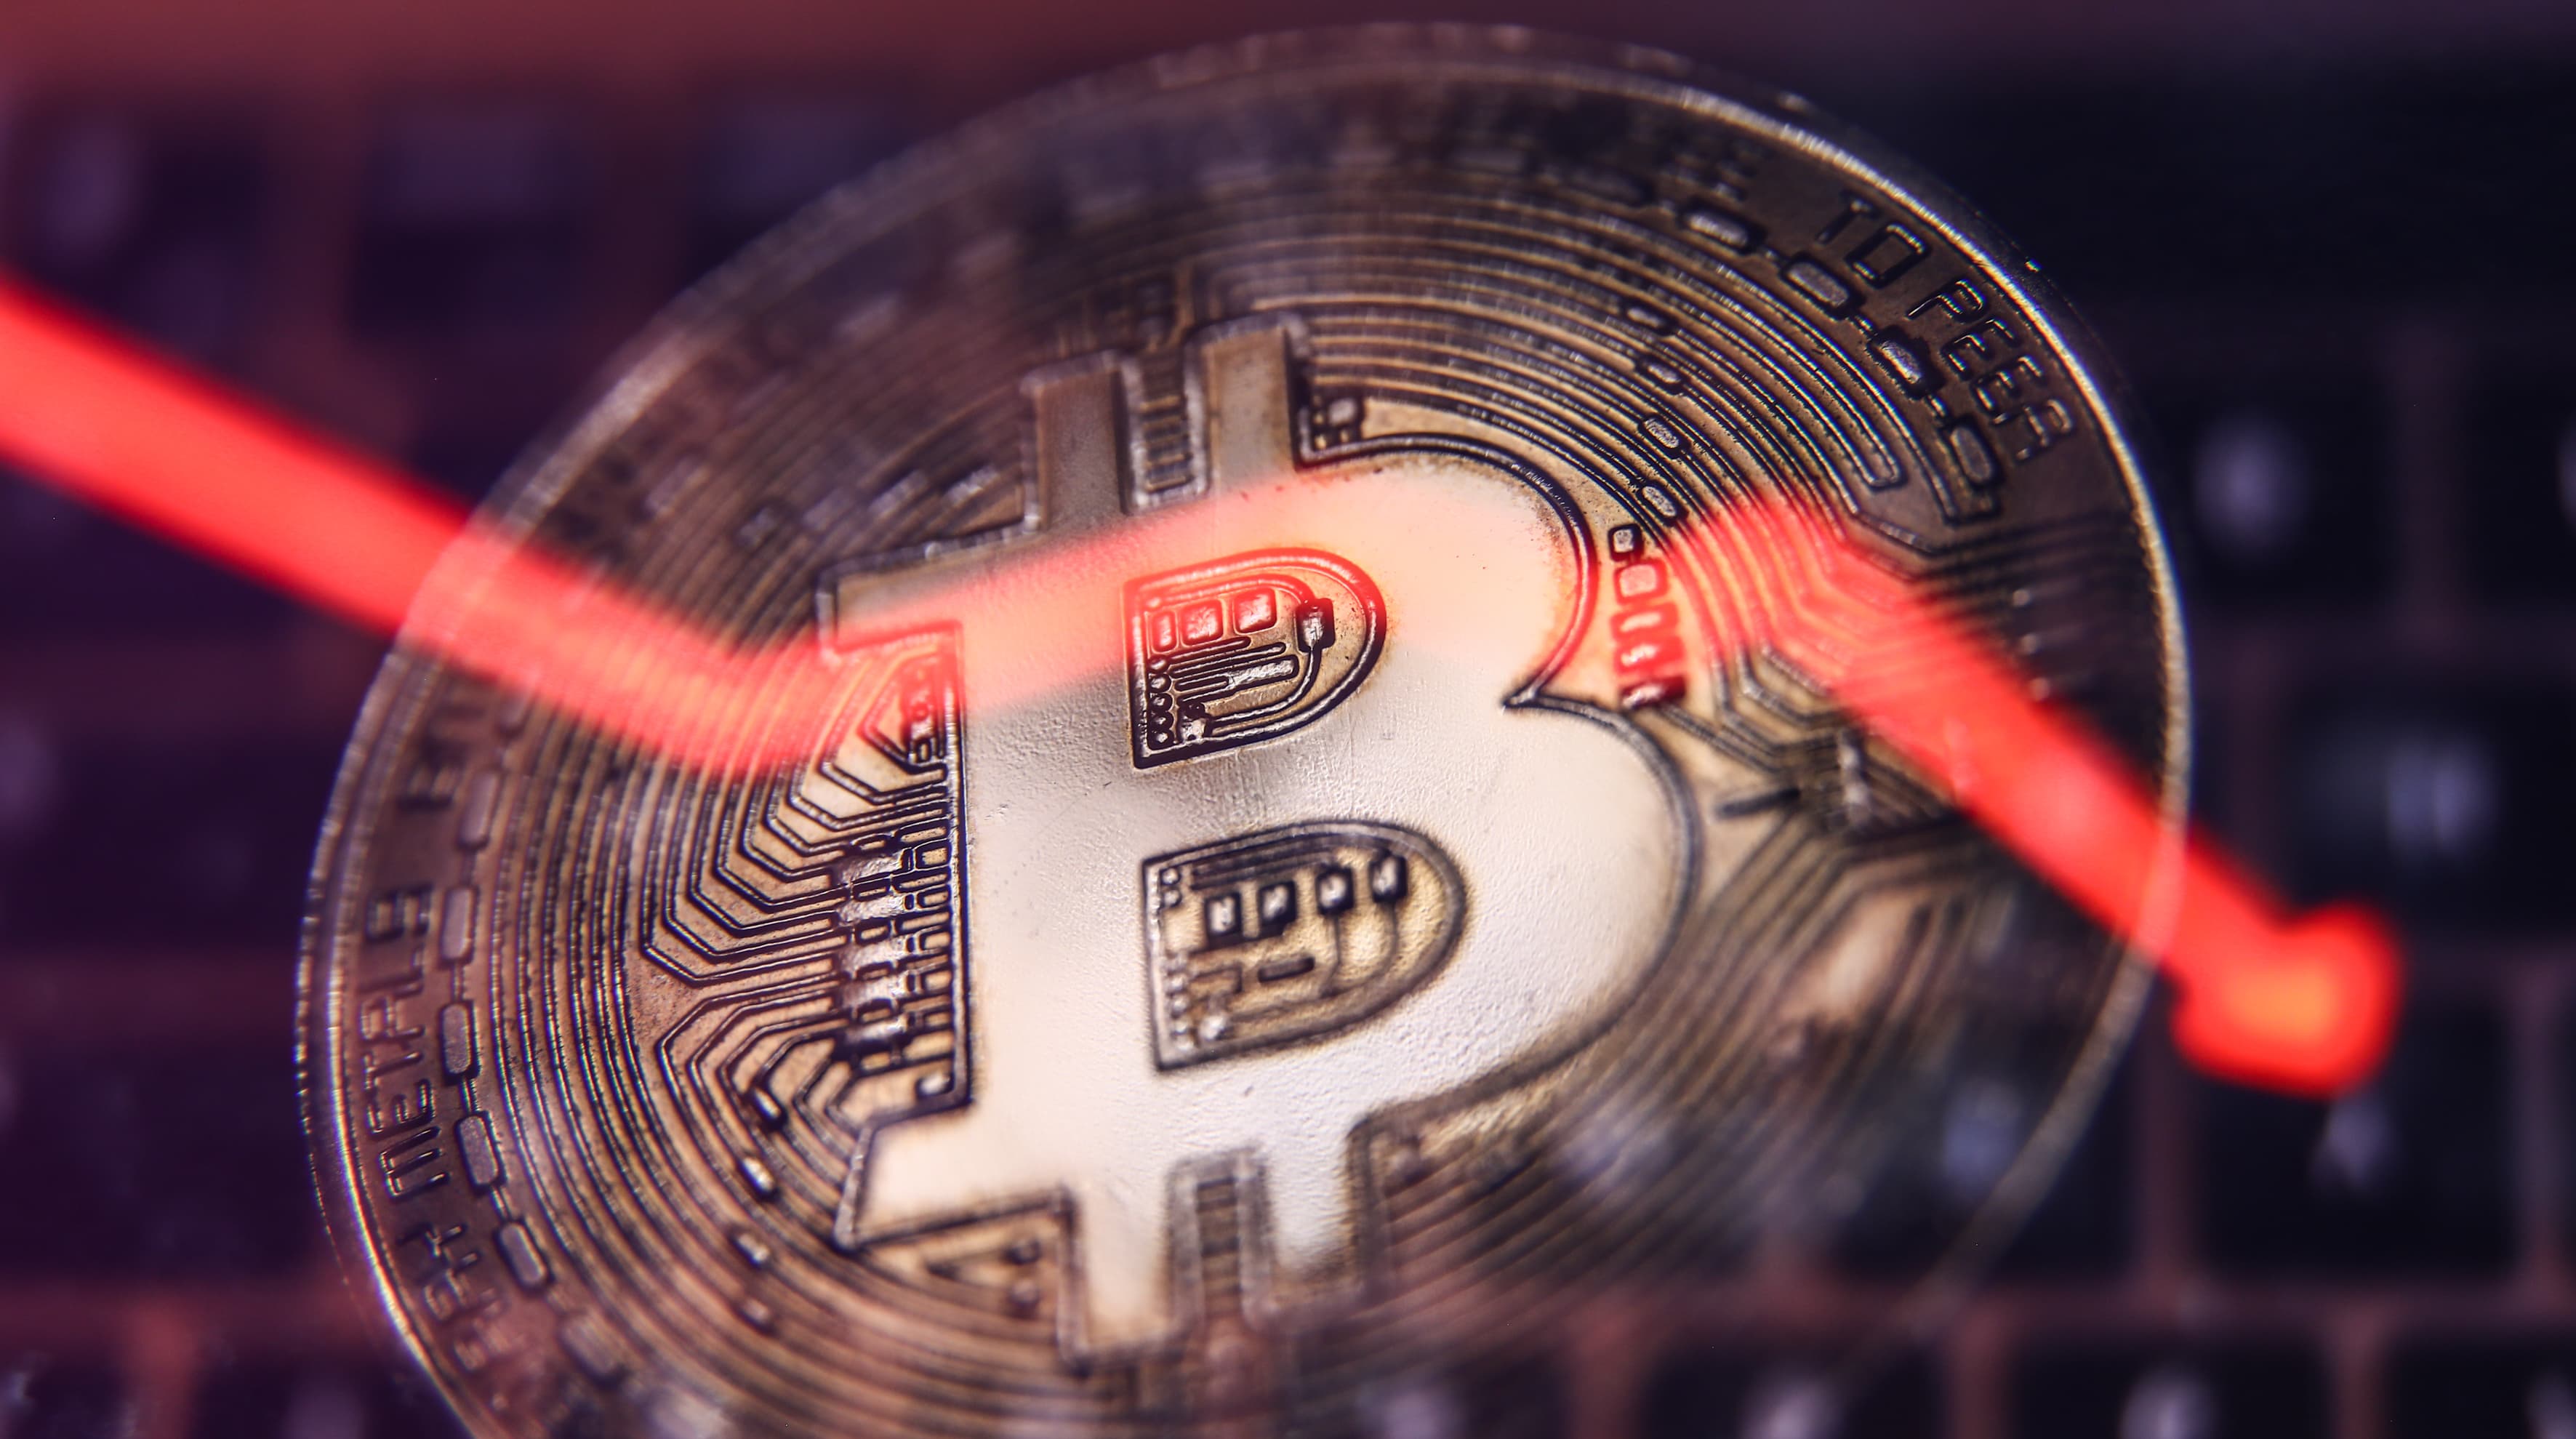 Bitcoin (BTC) falls as market focuses on Celsius issue, Fed rate hike